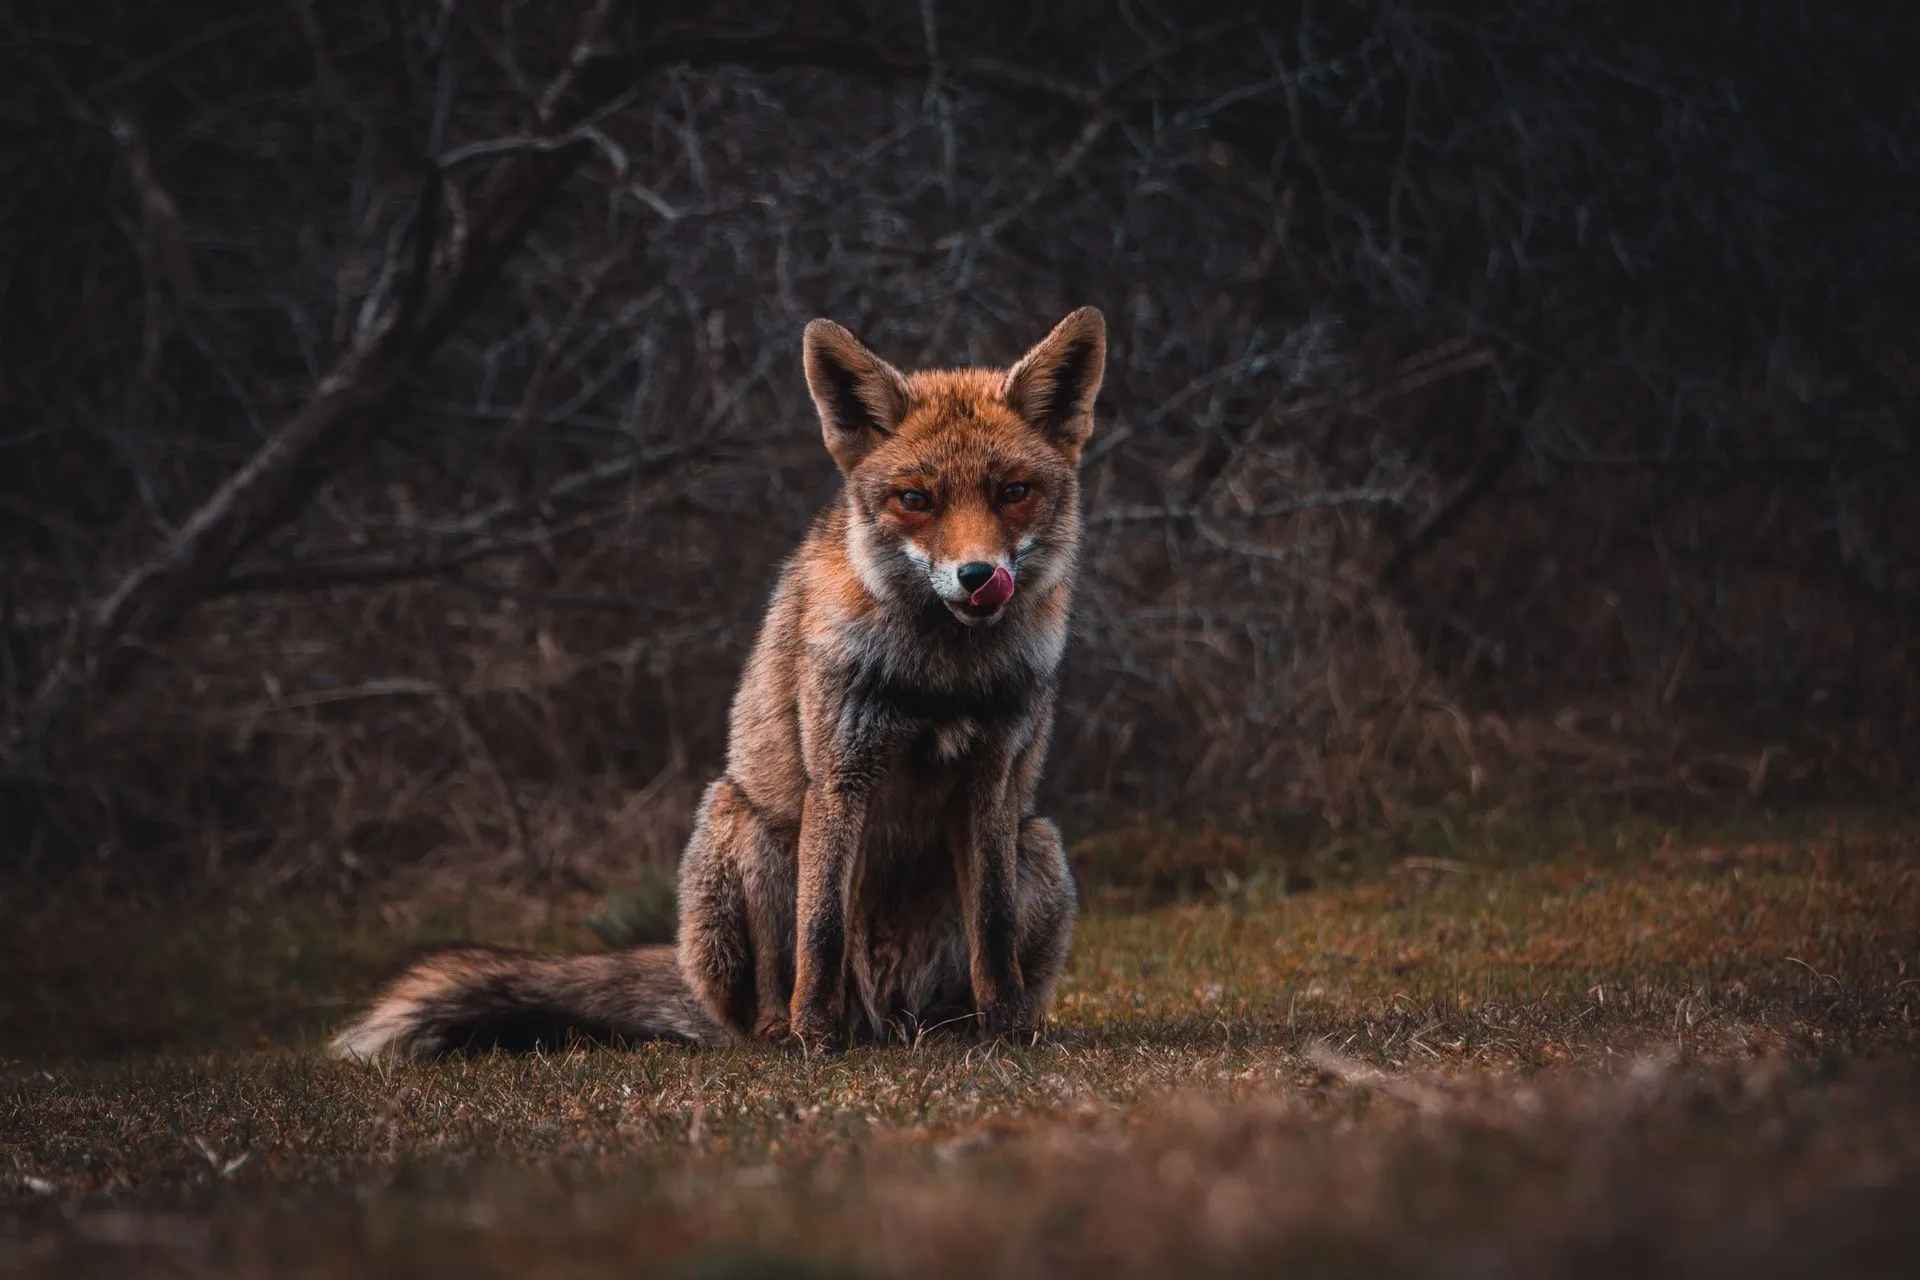 Coyotes are predators and hunt small animals like cats.